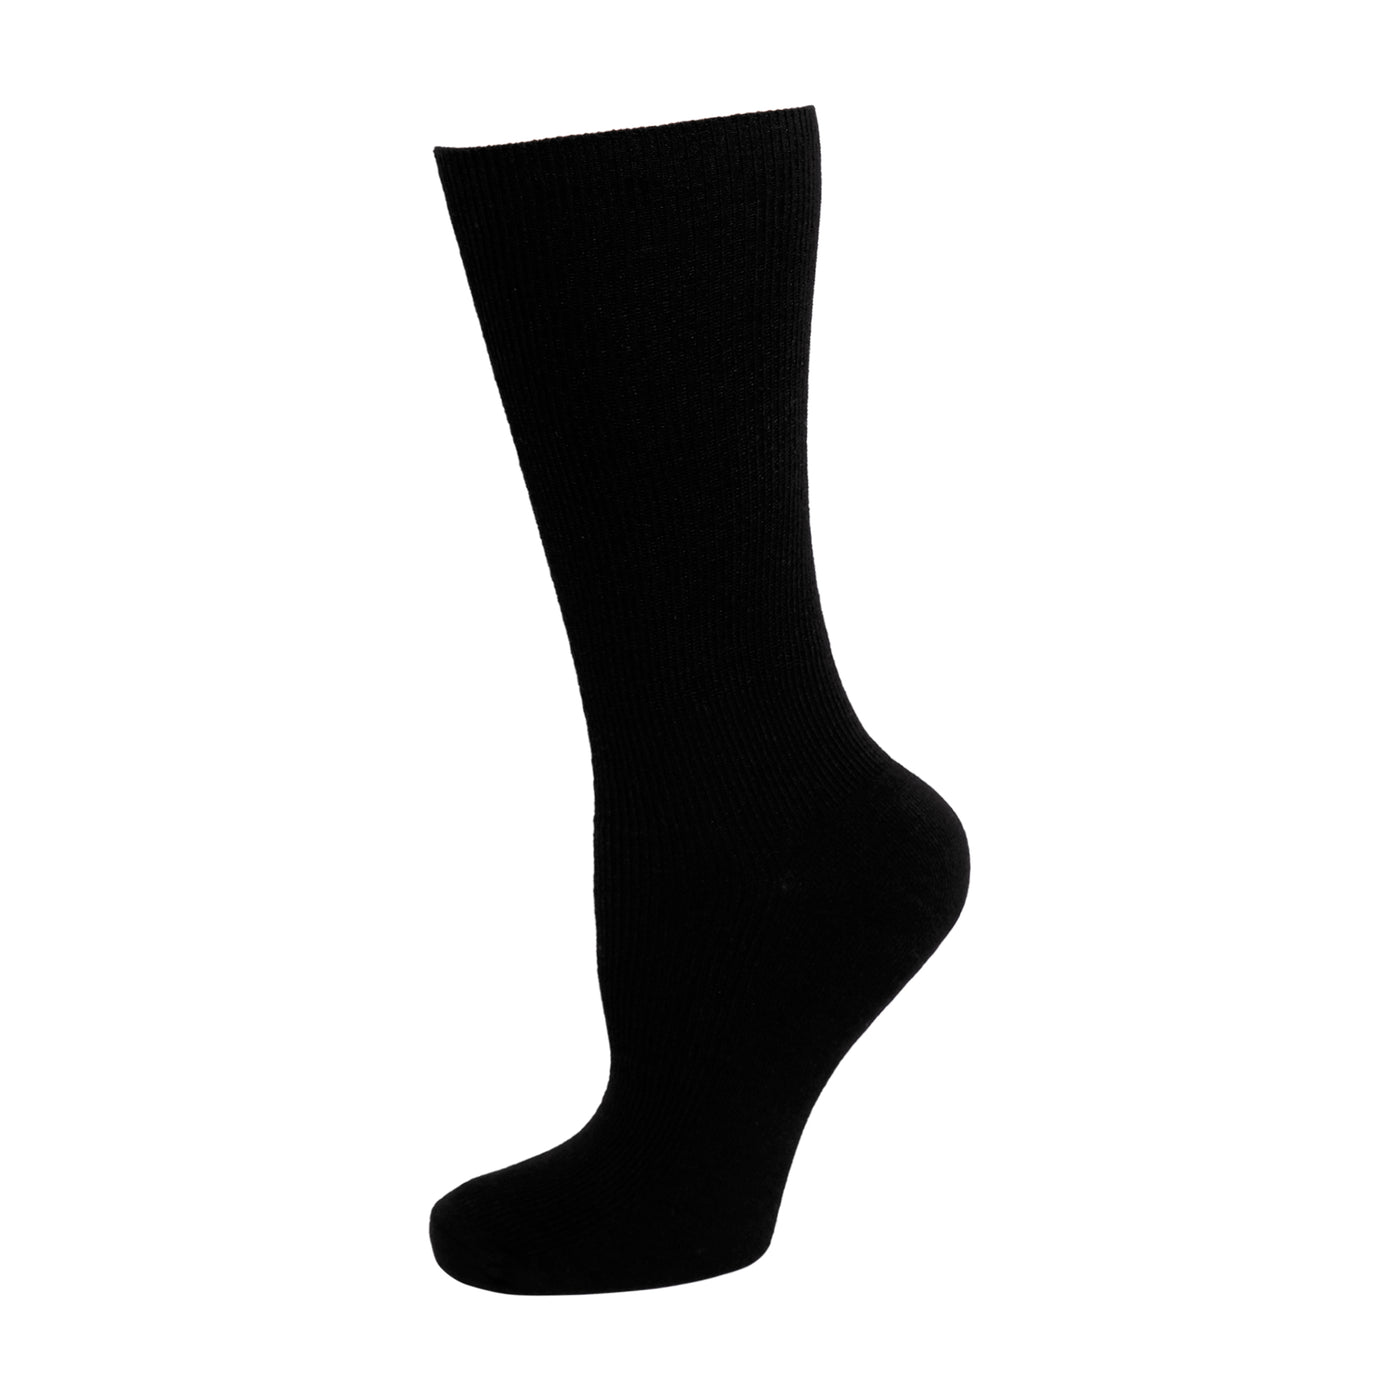 Underprotection Tina high sock in the colour black